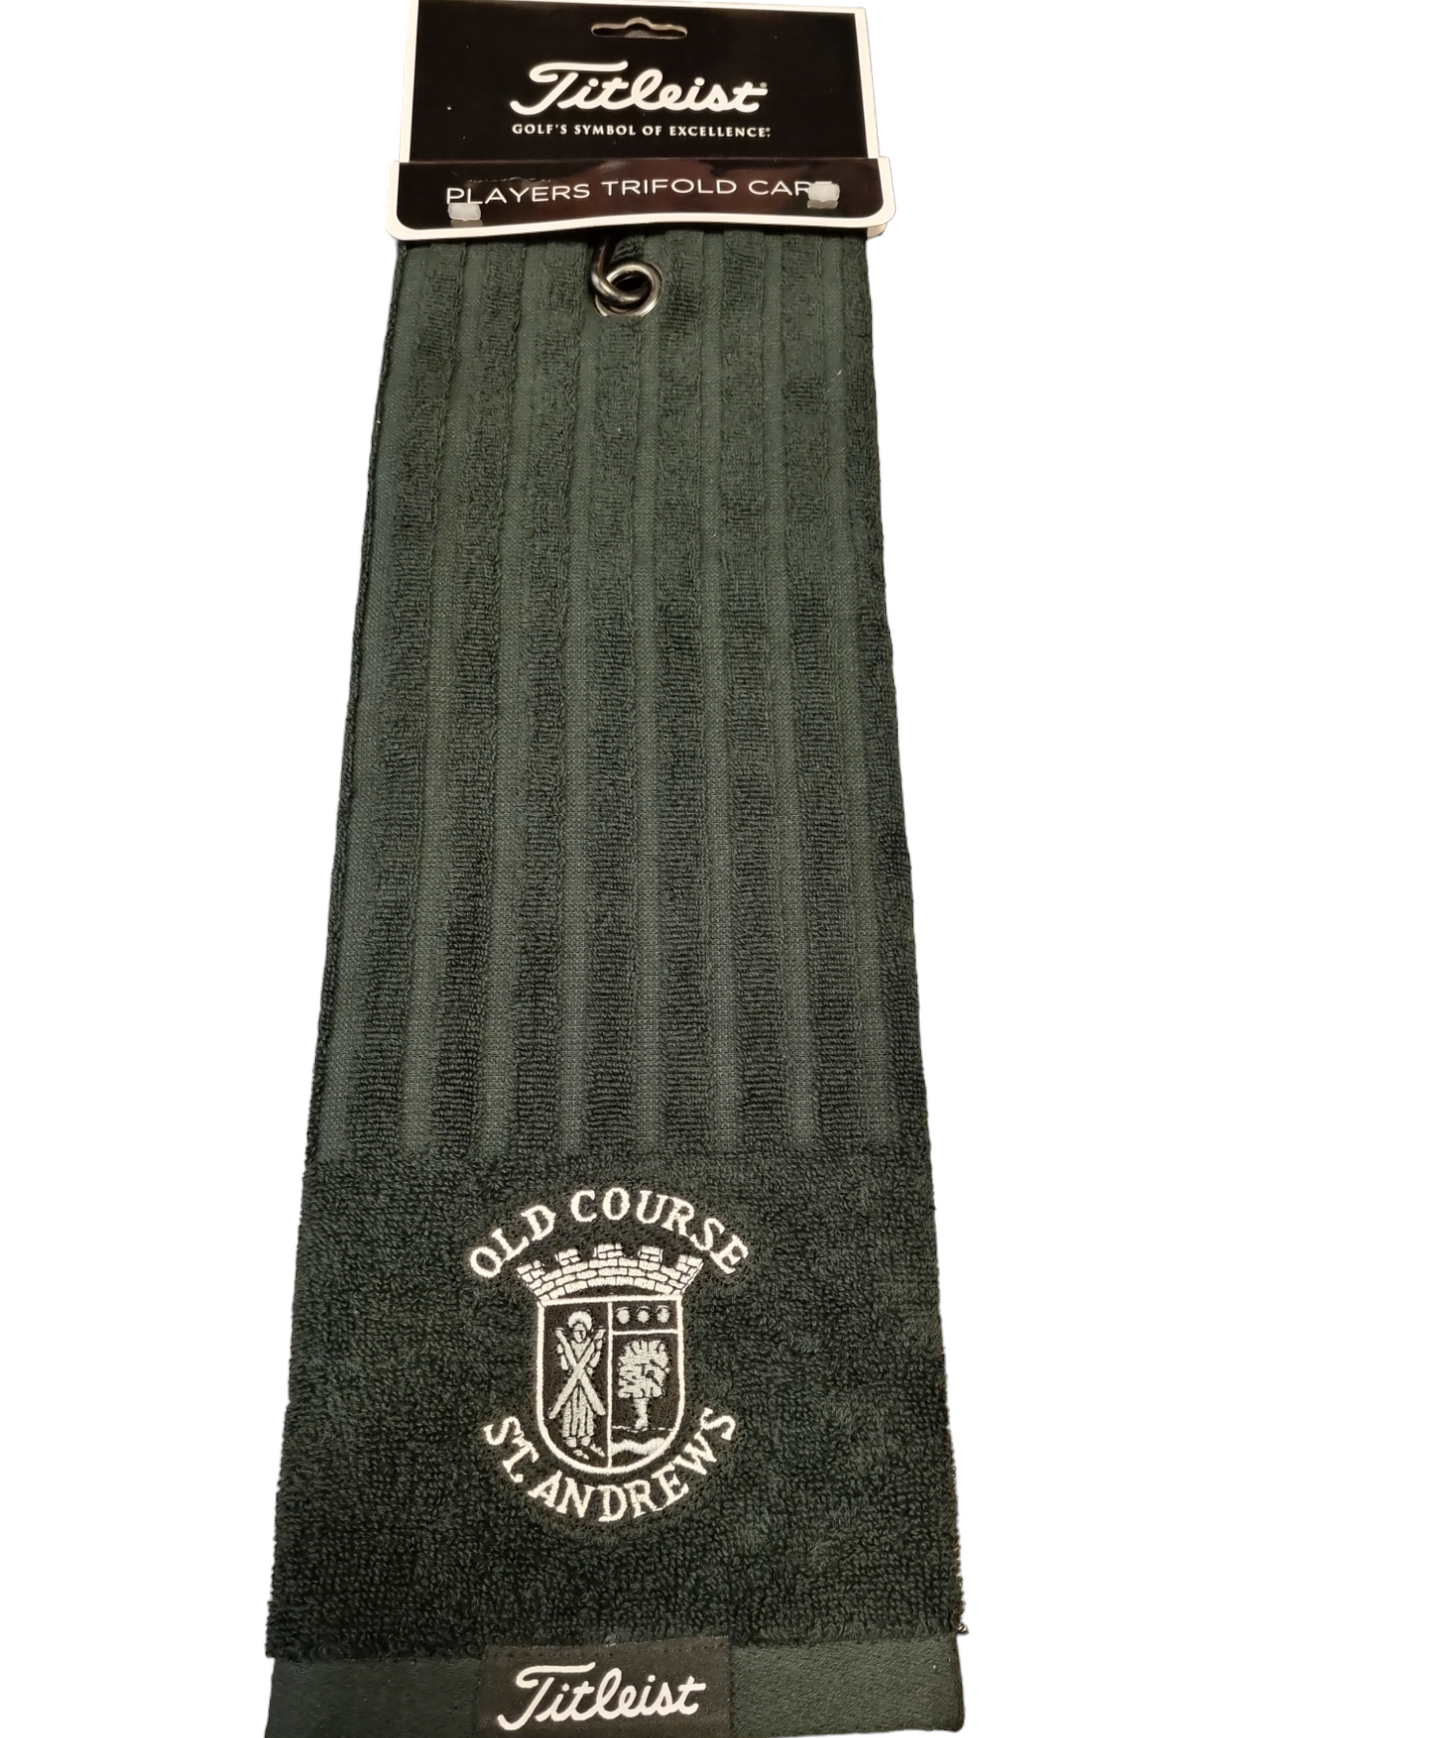 New - Titleist Trifold Golf Towels With Old Course St.Andrews Cresting.